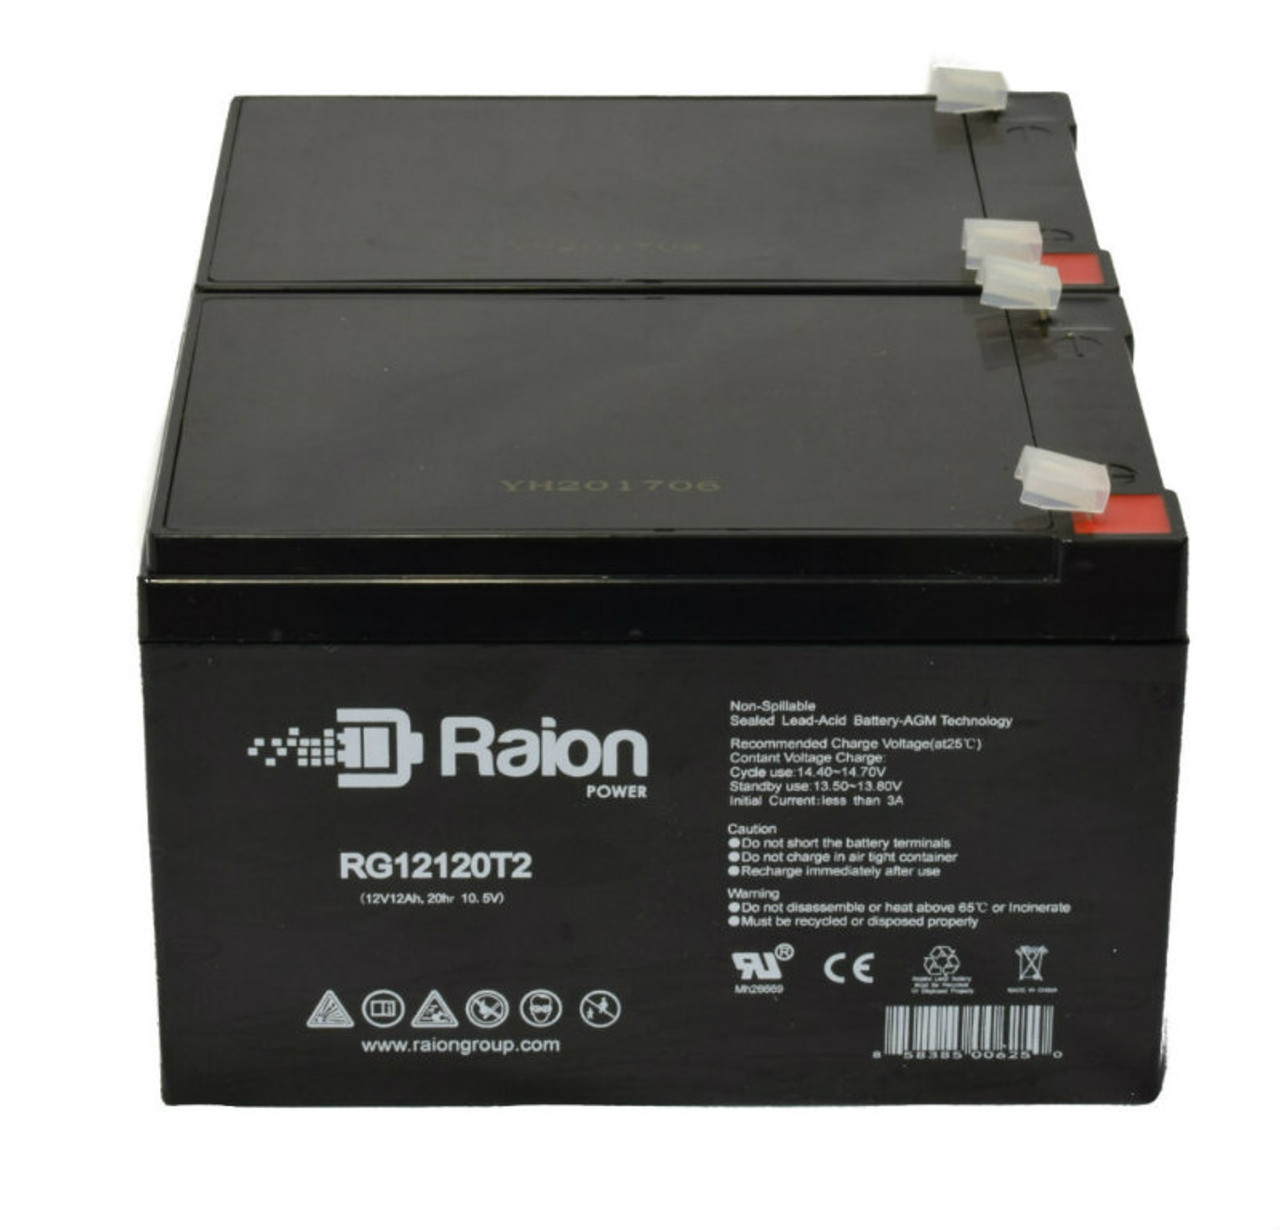 Raion Power RG12120T2 Replacement Battery Set for Pride Mobility Go-Go Mobility Scooter - 2 Pack